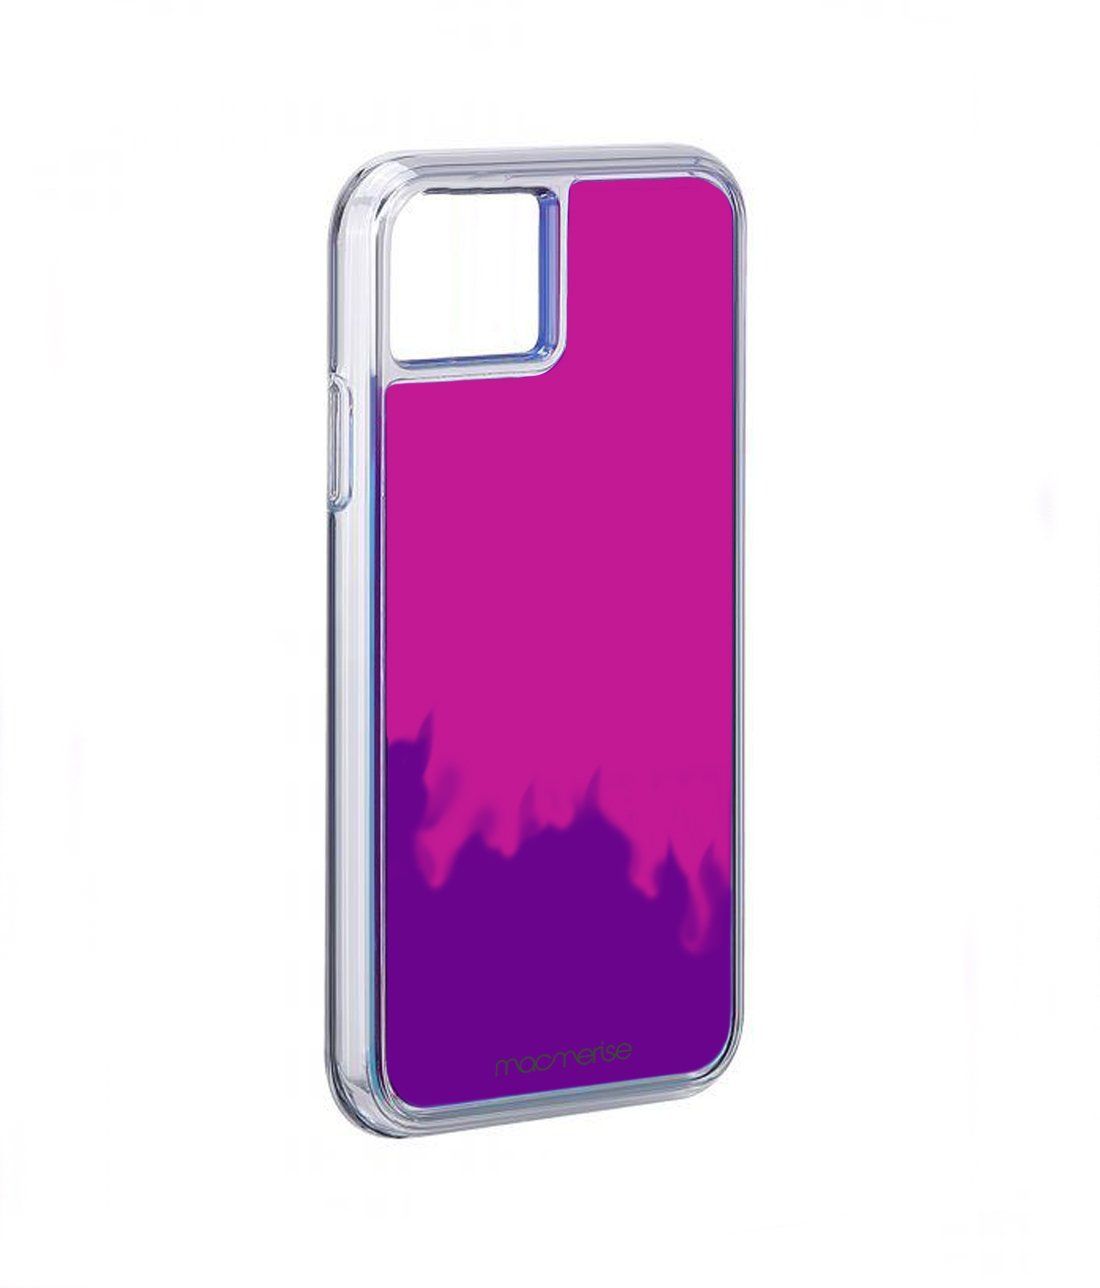 Neon Sand Purple Pink - Neon Sand Phone Case for iPhone 11 Pro